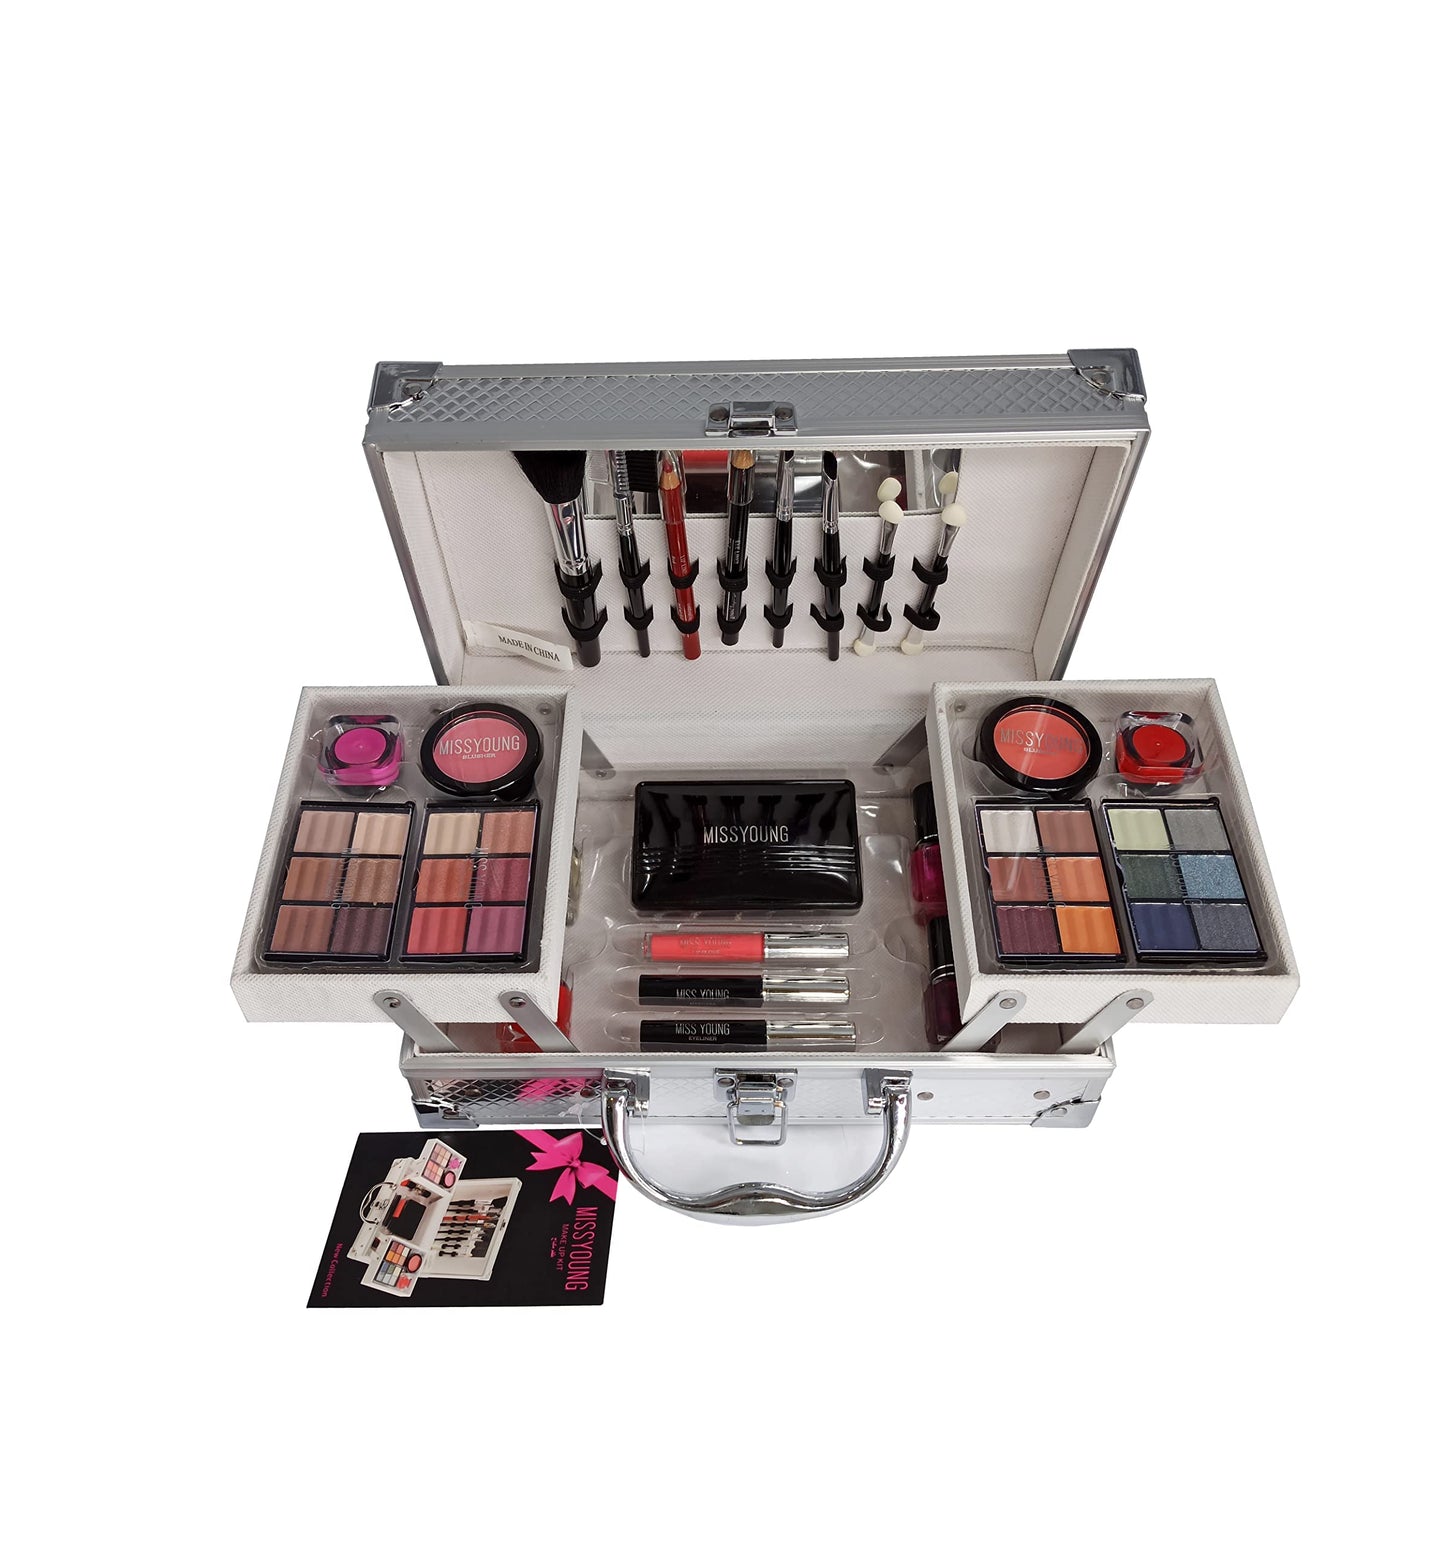 Miss Young Professional Makeup Kit Sets - Wide Range Of Combinations To Chose From! (Set of 44 Pcs)